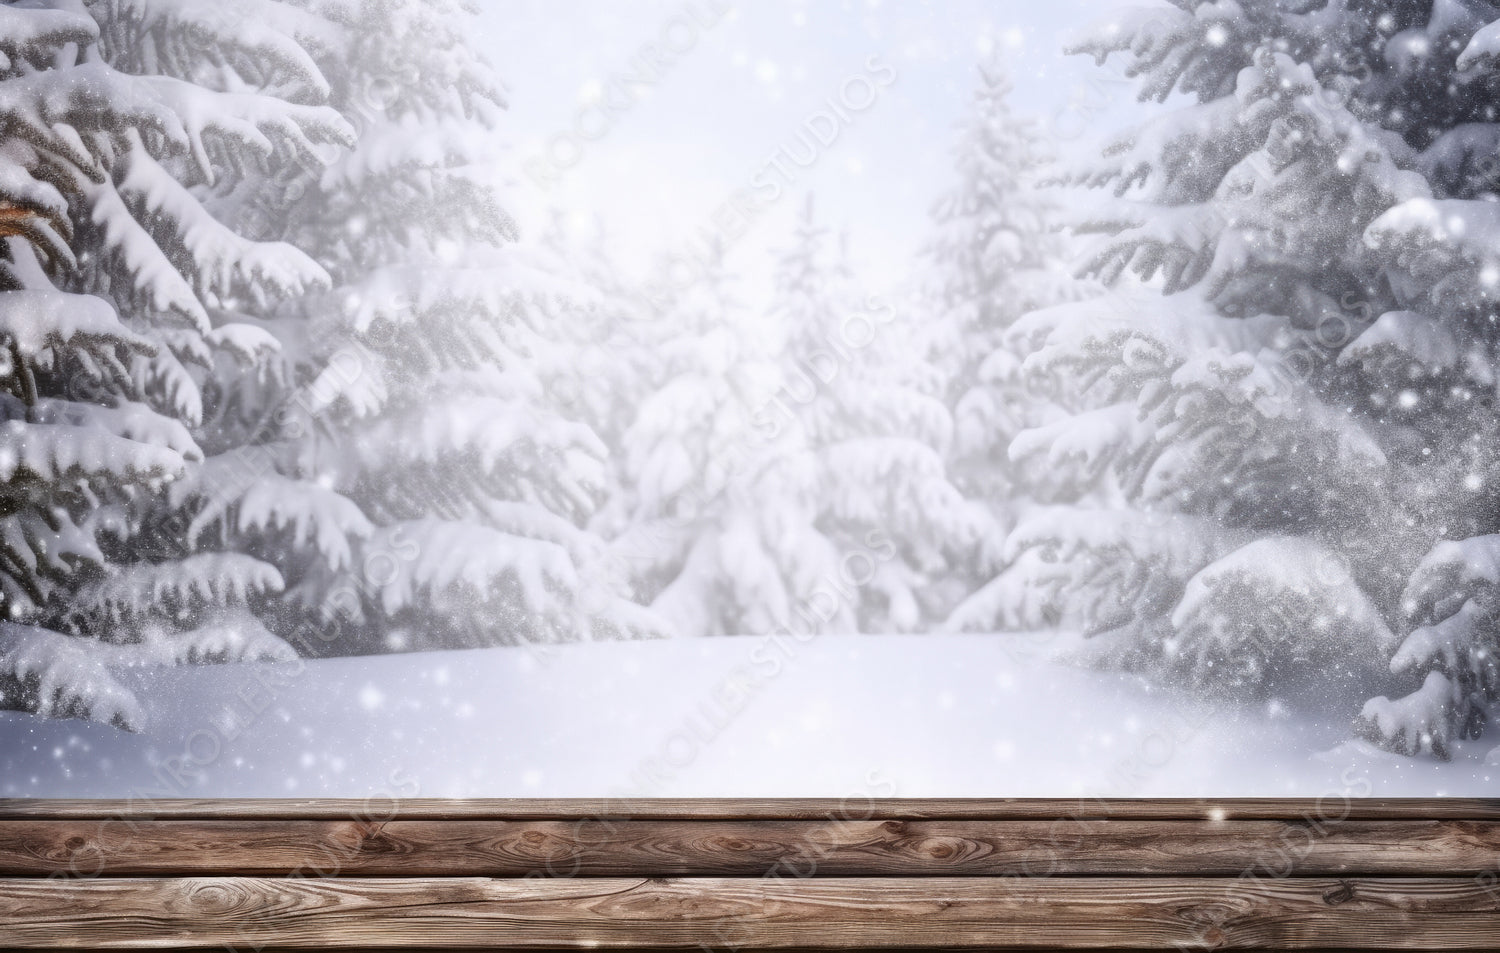 Winter christmas scenic background with copy space. The wooden flooring was strewn with snow in the forest and the branches of fir-trees covered with snow on the nature.